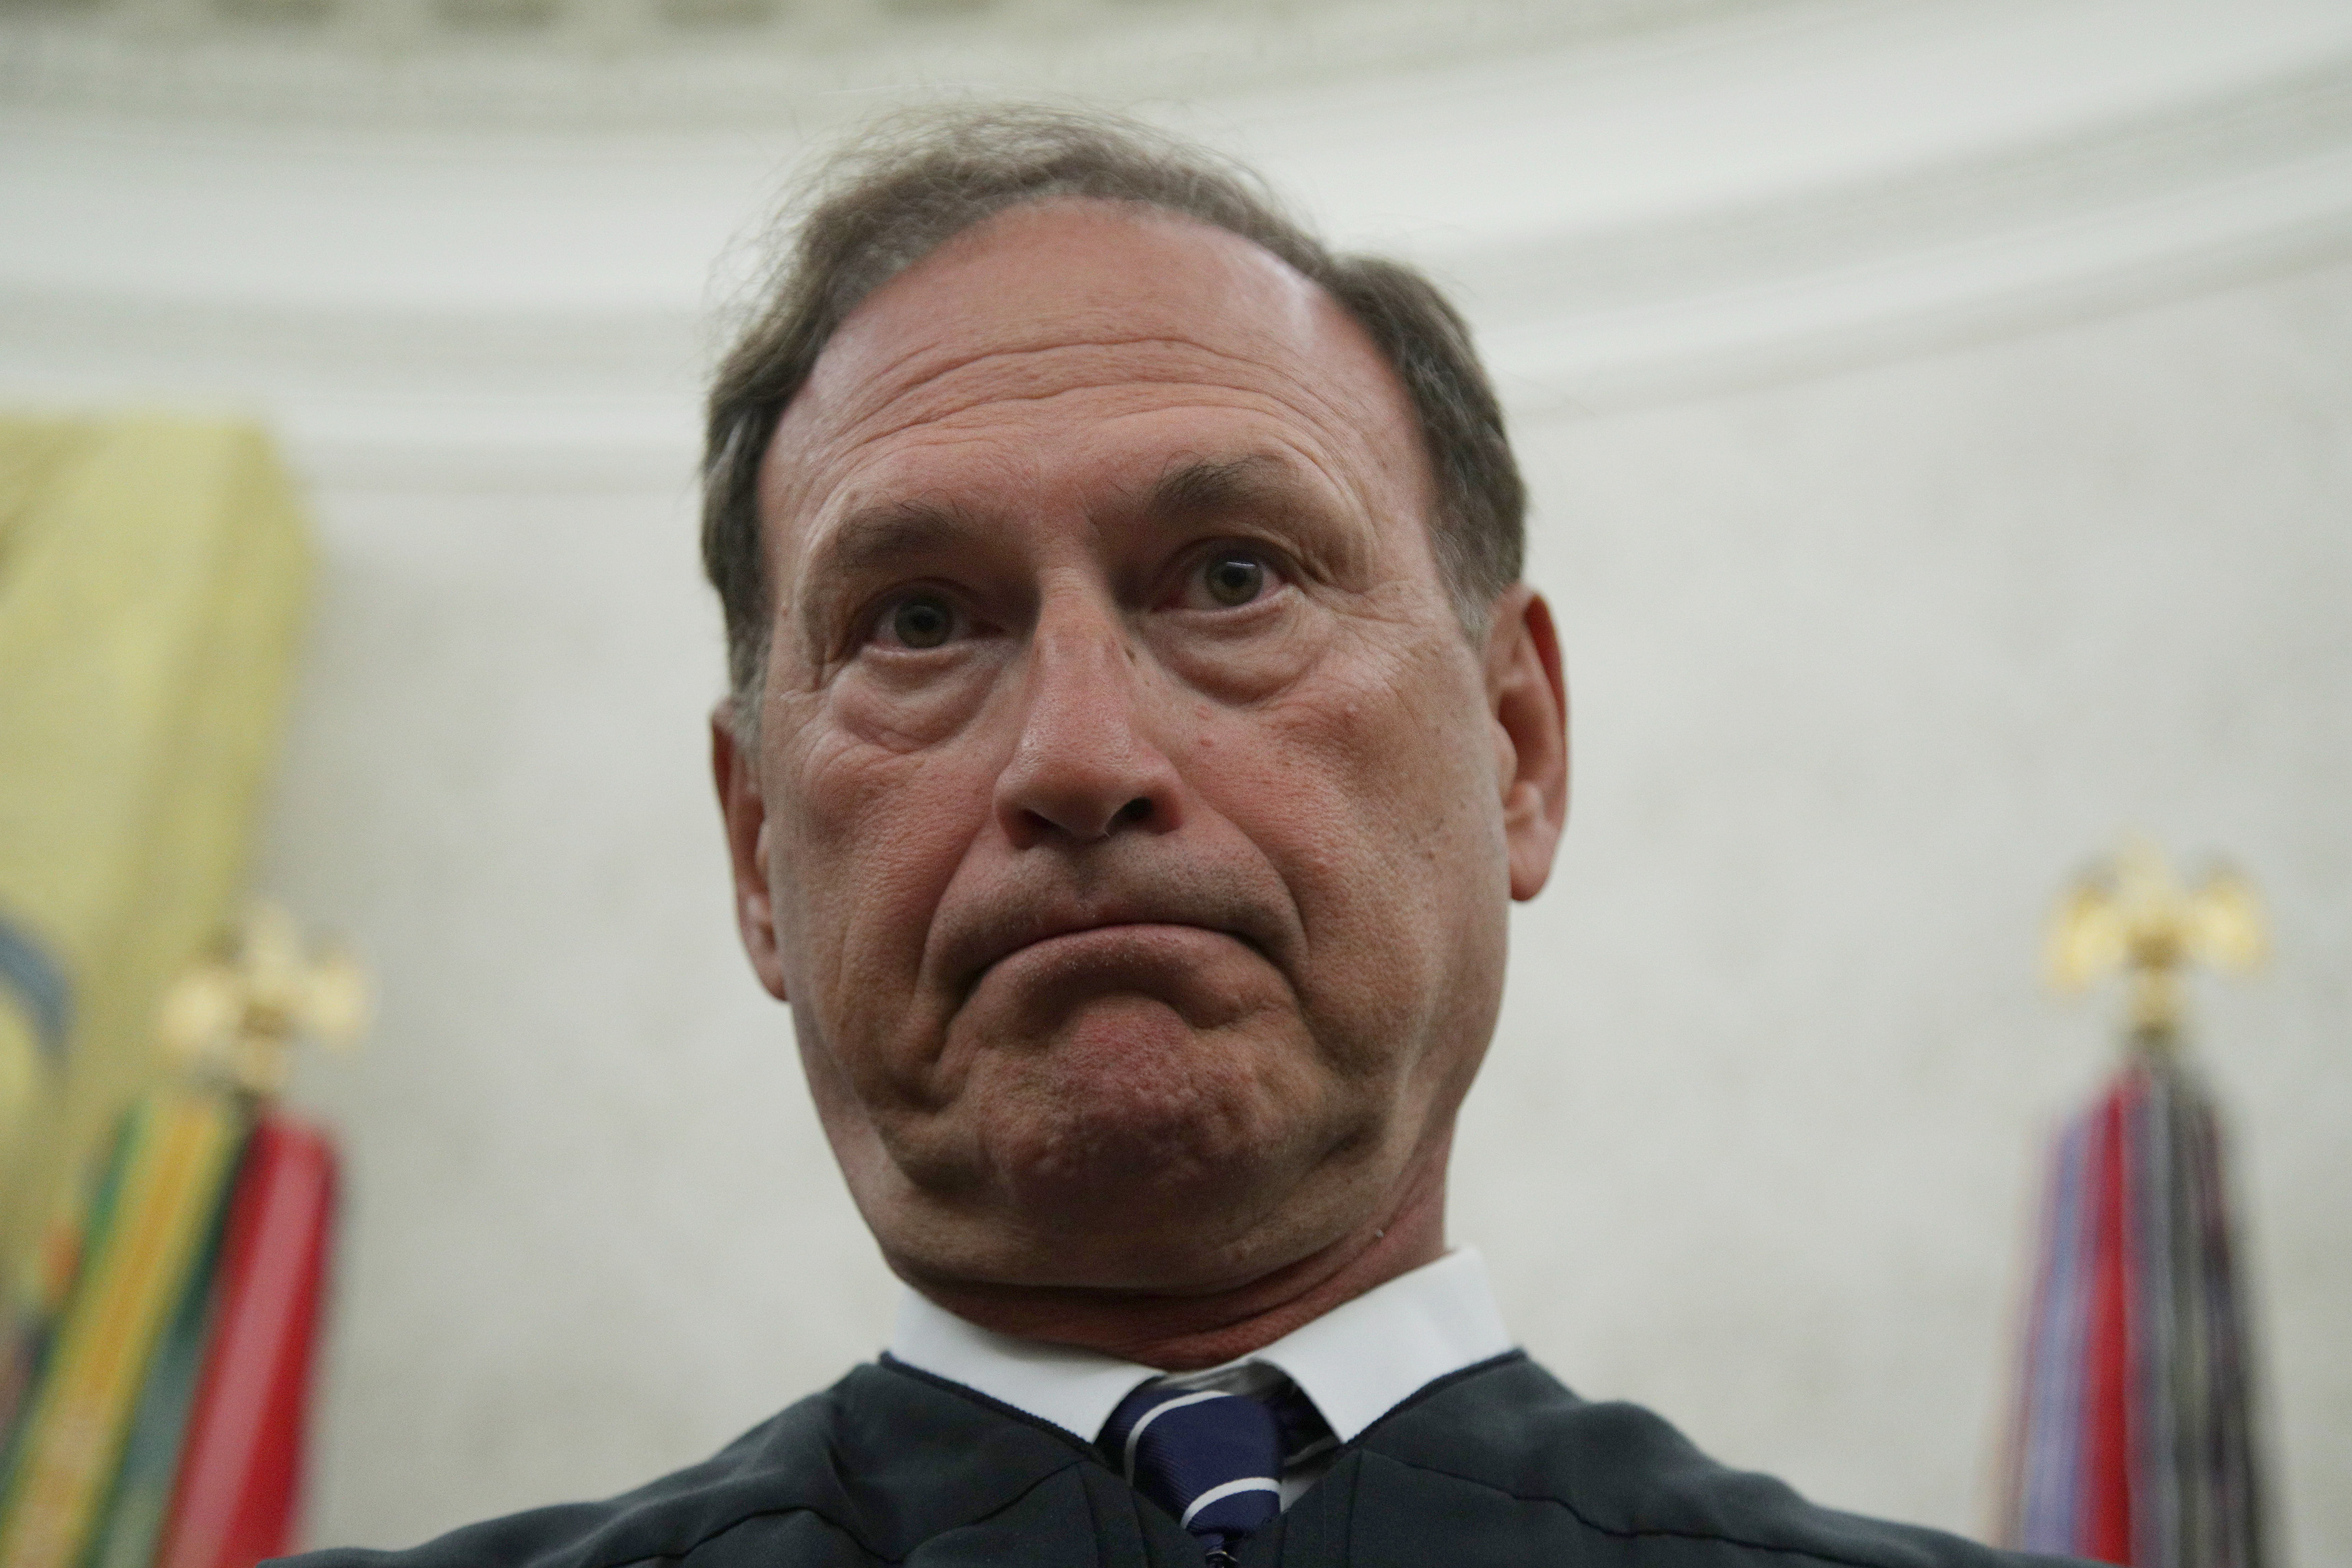 Supreme Court Justice and Philadelphia Phillies fan Samuel Alito seen at the July 2019 swearing-in of Mark Esper as Secretary of Defense.